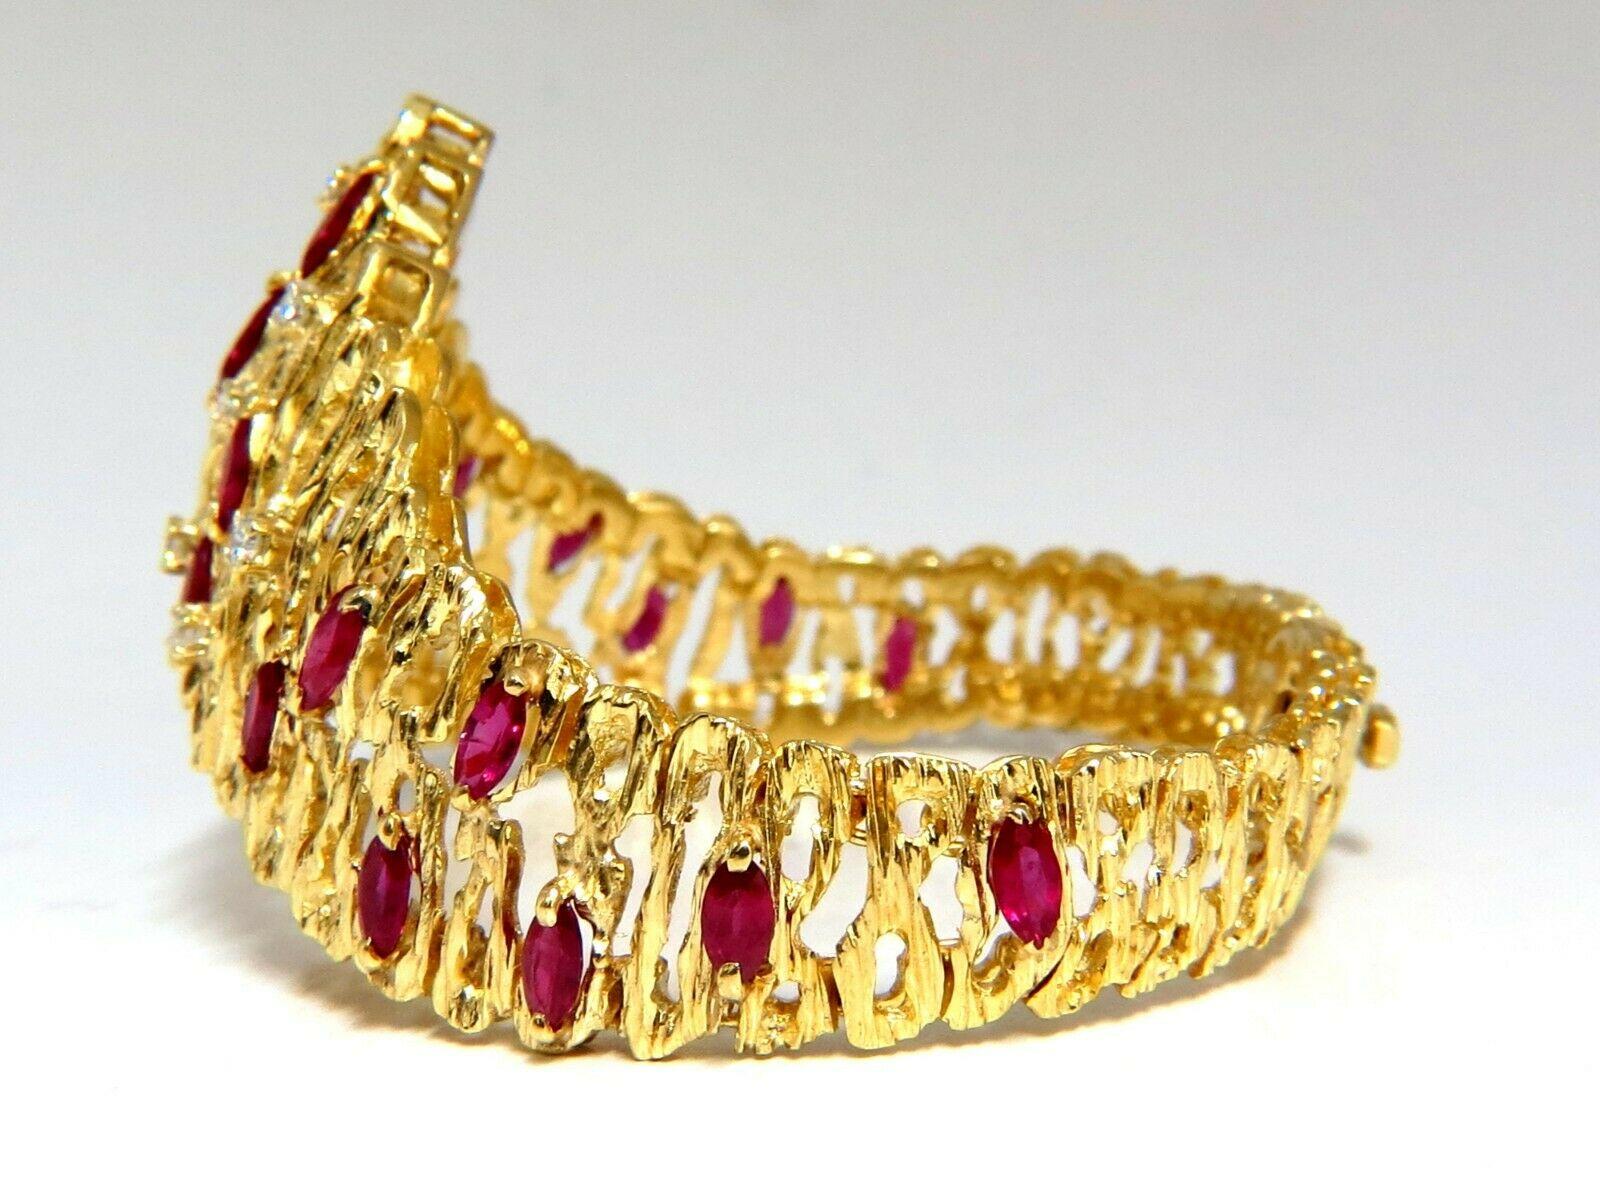 Ruby & Diamond Coral Patina Chevron Cuff Bracelet

5.50ct. Natural ruby & .50ct Diamond bracelet.

Marquise, full cuts 

Clean clarity

Transparent & Vivid Reds.

Ranging: 4x 3mm

Natural Diamonds: Rounds & full cuts

Vs-2 clarity G color

18kt.